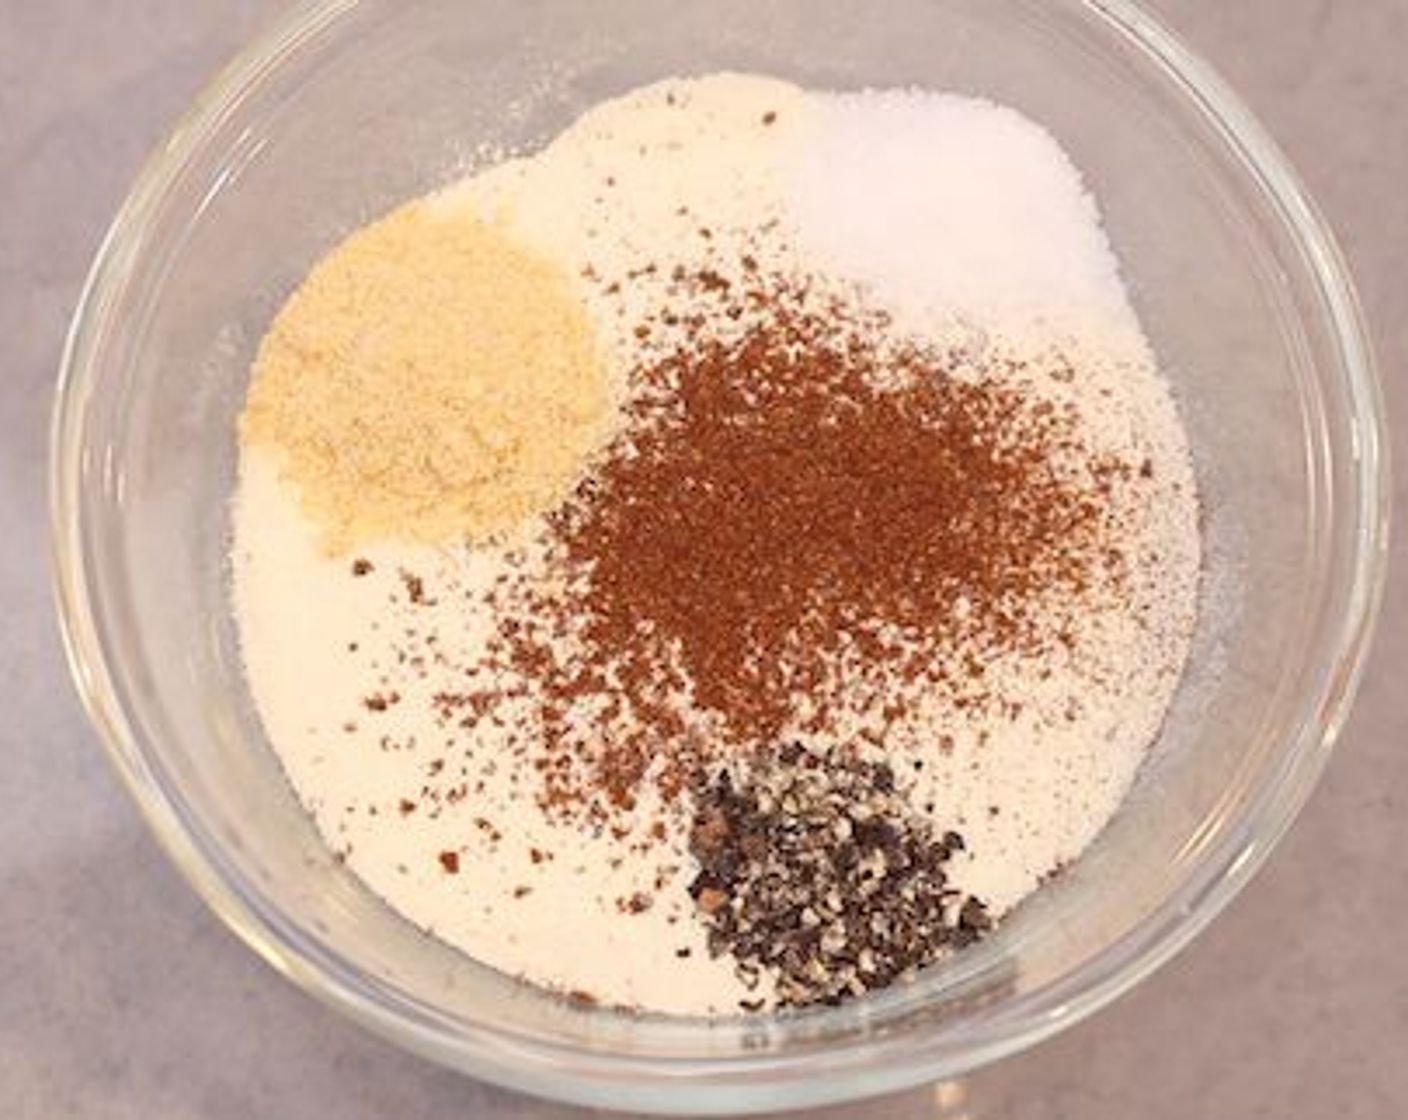 step 1 Whisk your Eggs (2) and leave aside. To spice our Unflavored Protein Powder (1 1/2 cups), add in Paprika (1/2 tsp), McCormick® Garlic Powder (1/2 tsp), Ground Black Pepper (1/4 tsp) and Salt (1/2 tsp). Mix everything together until well combined.